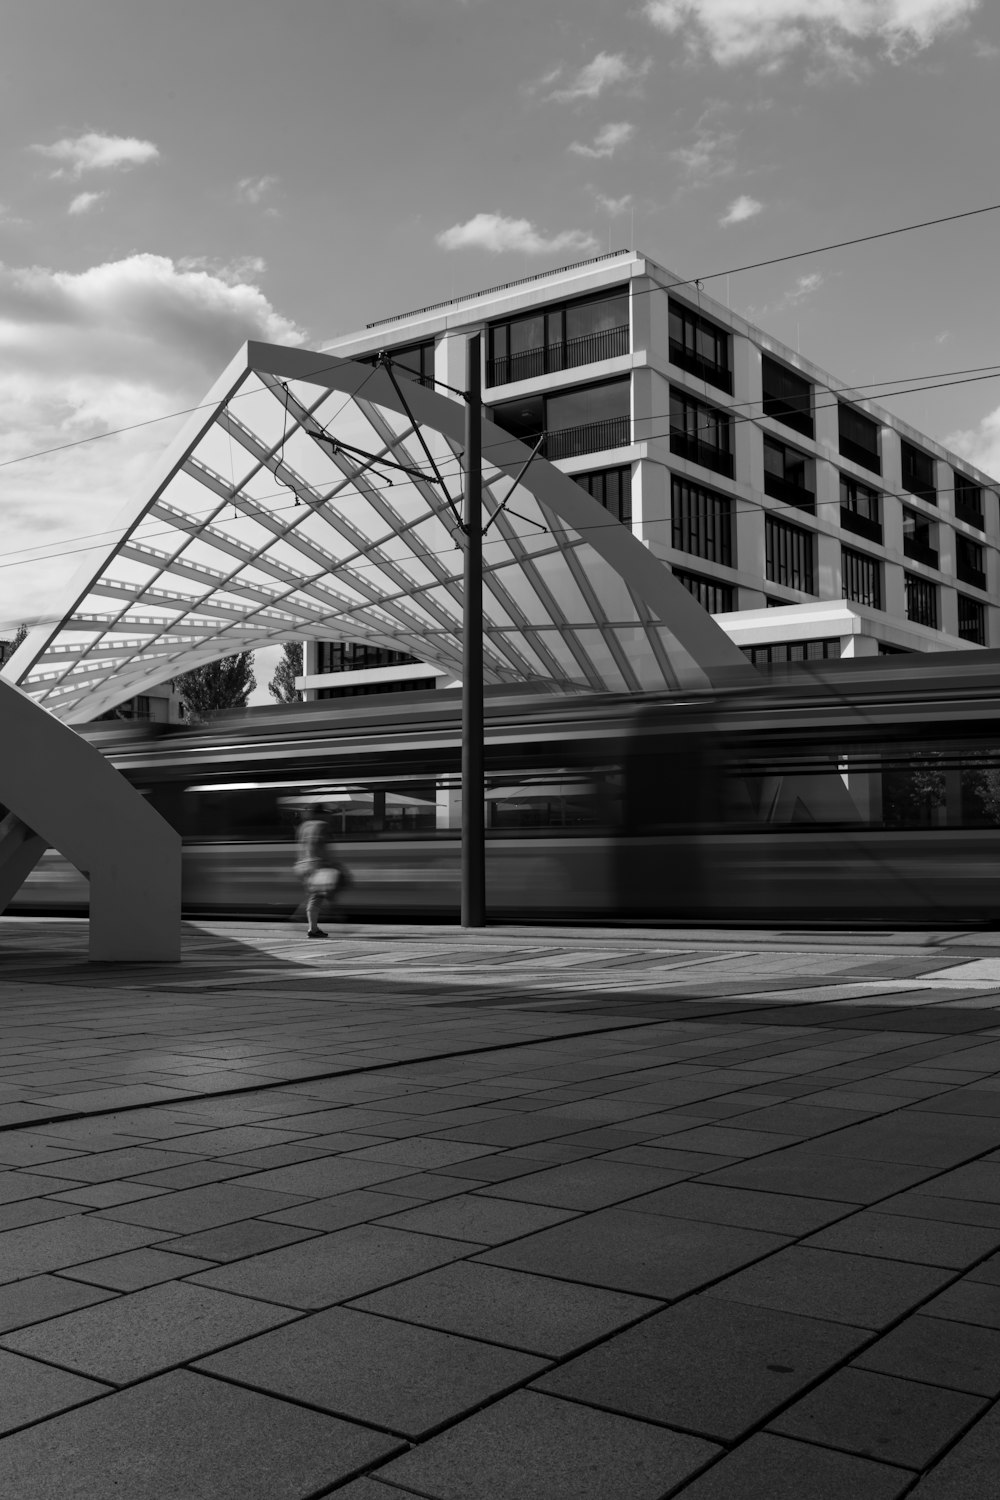 a black and white photo of a train passing by a building